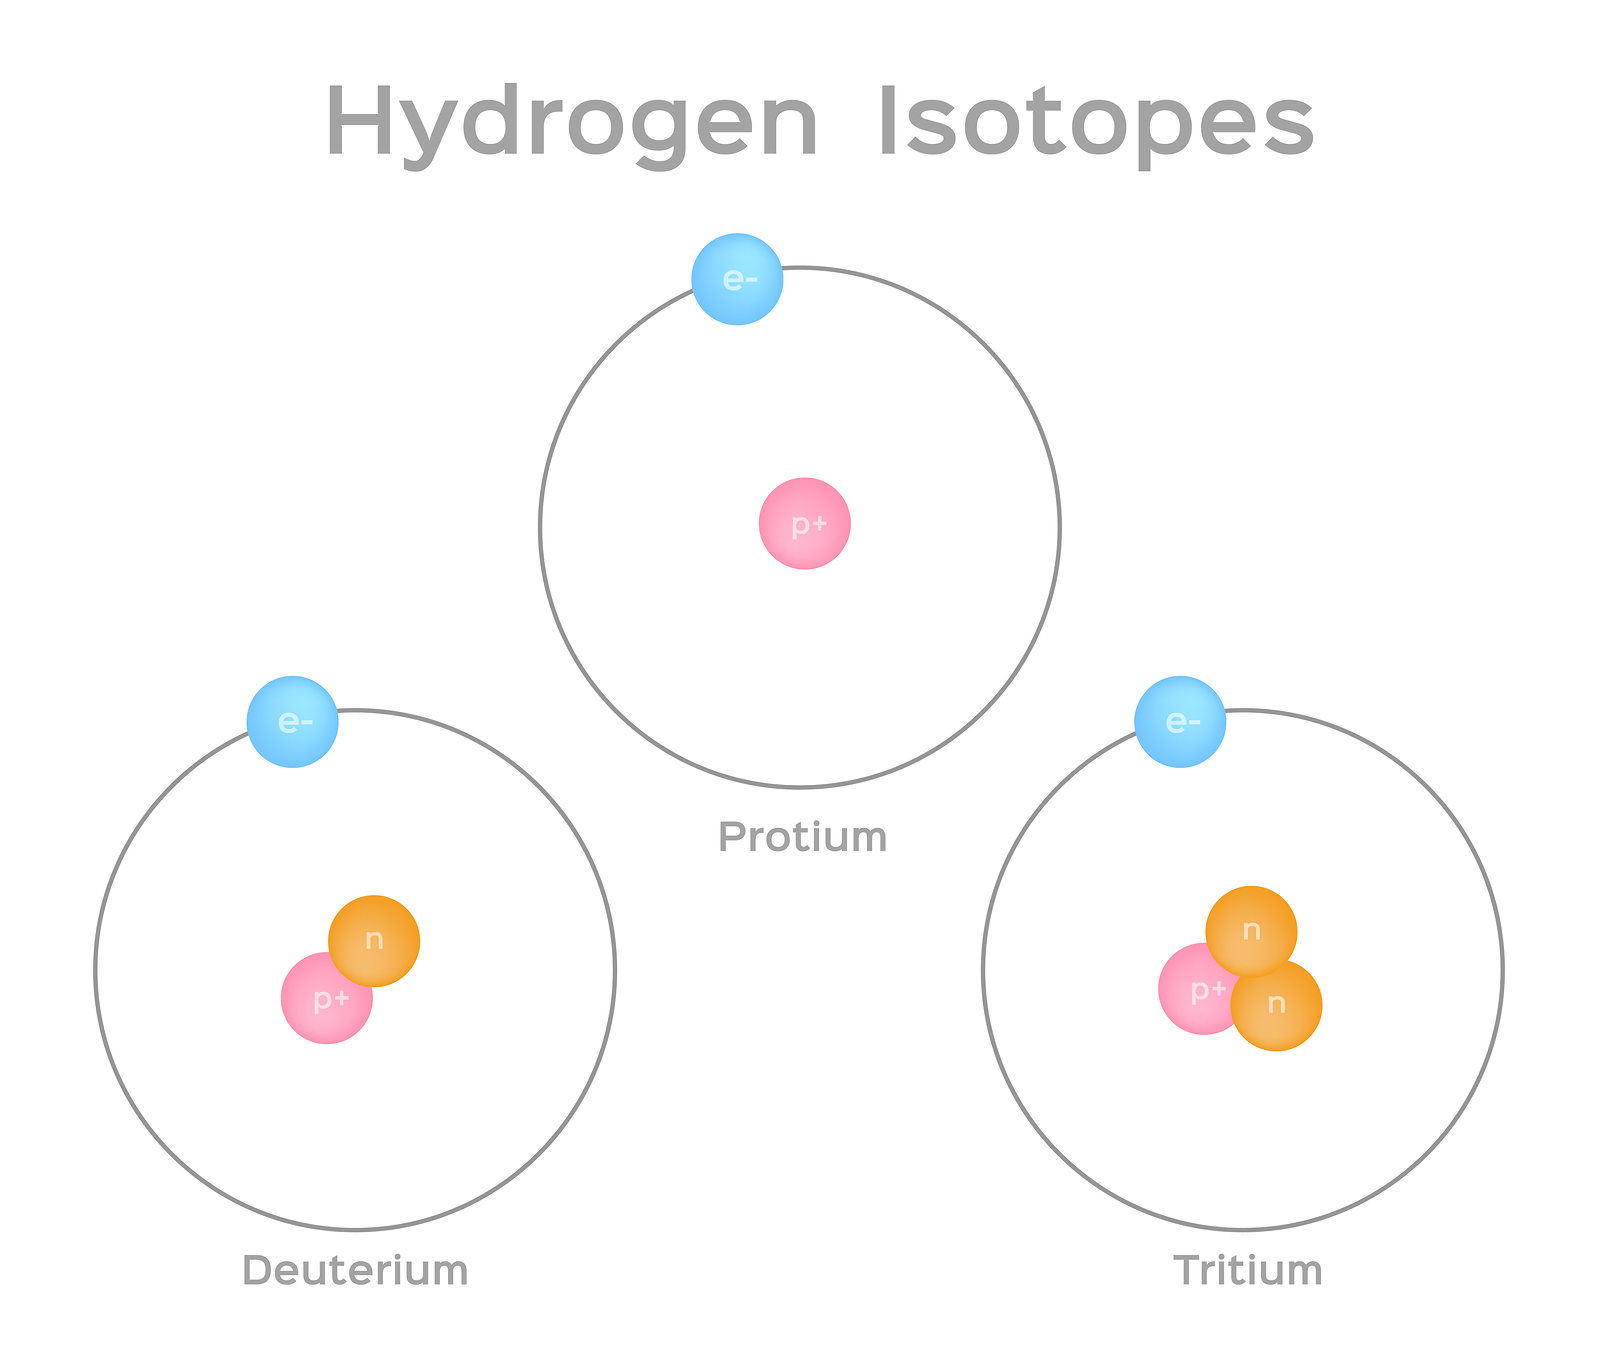 Models of protium, deuterium, and tritium, which are all isotopes of hydrogen